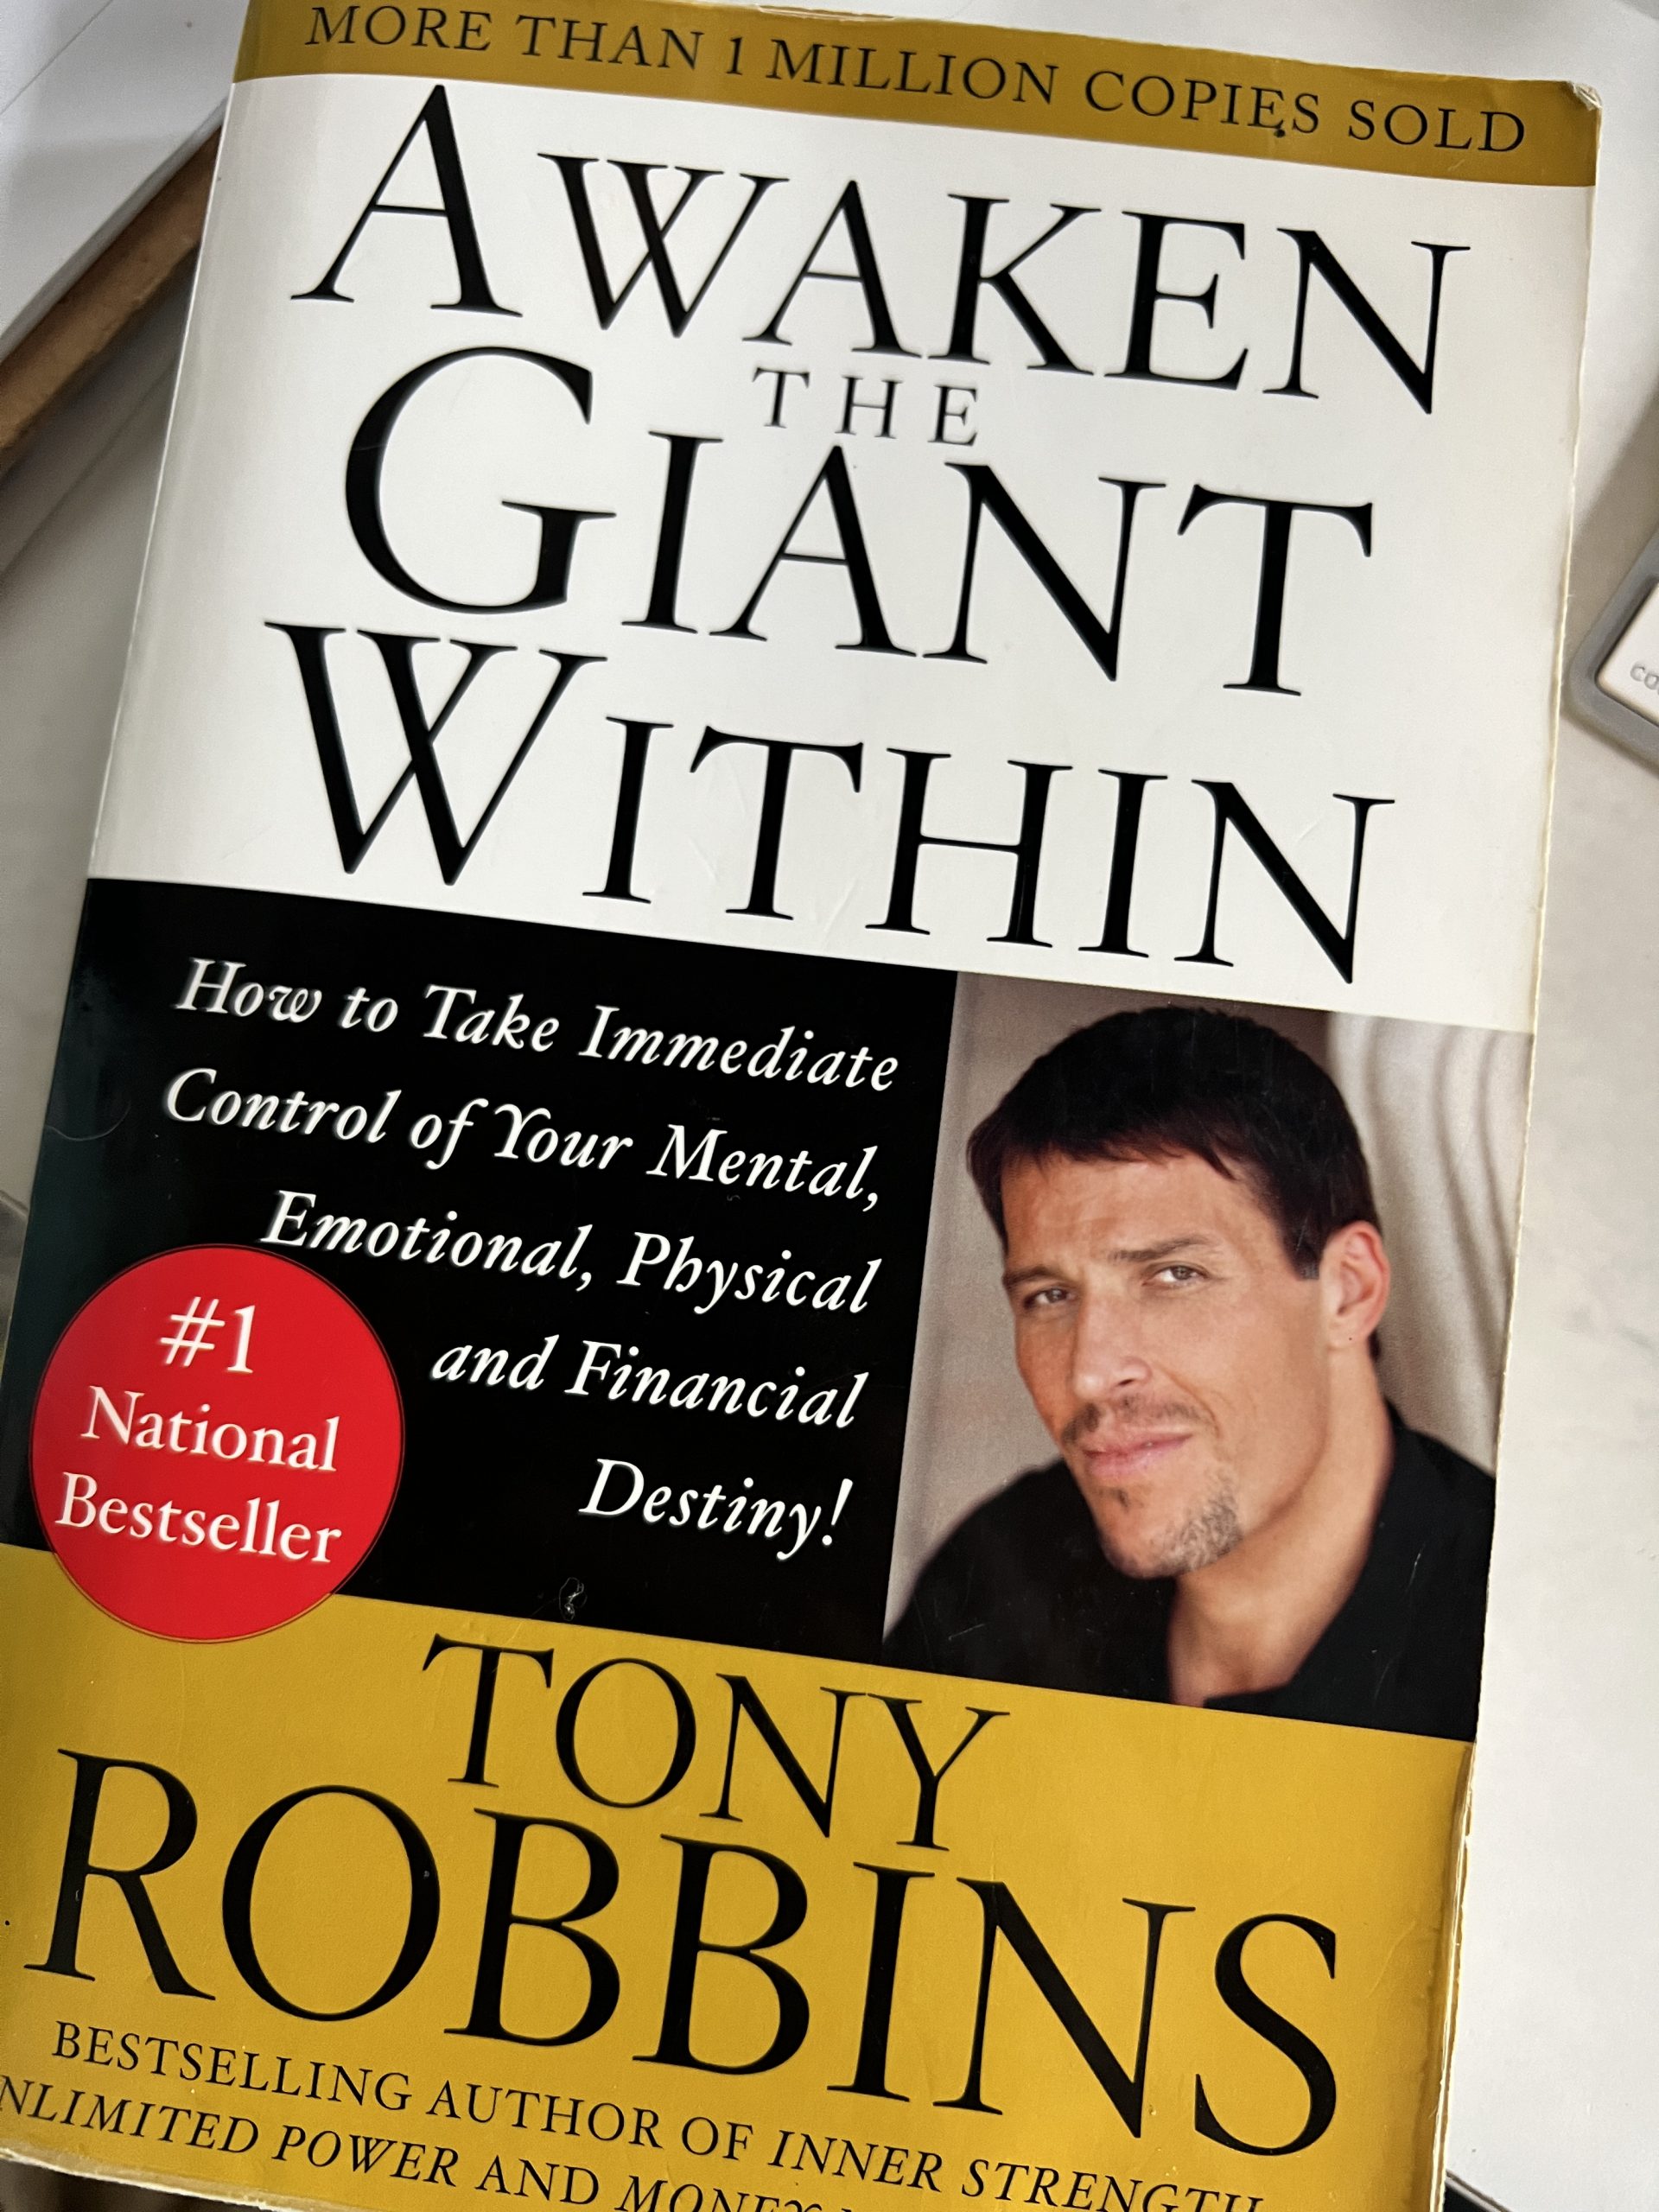 awaken the giant book by tony robbins values greater than motivation